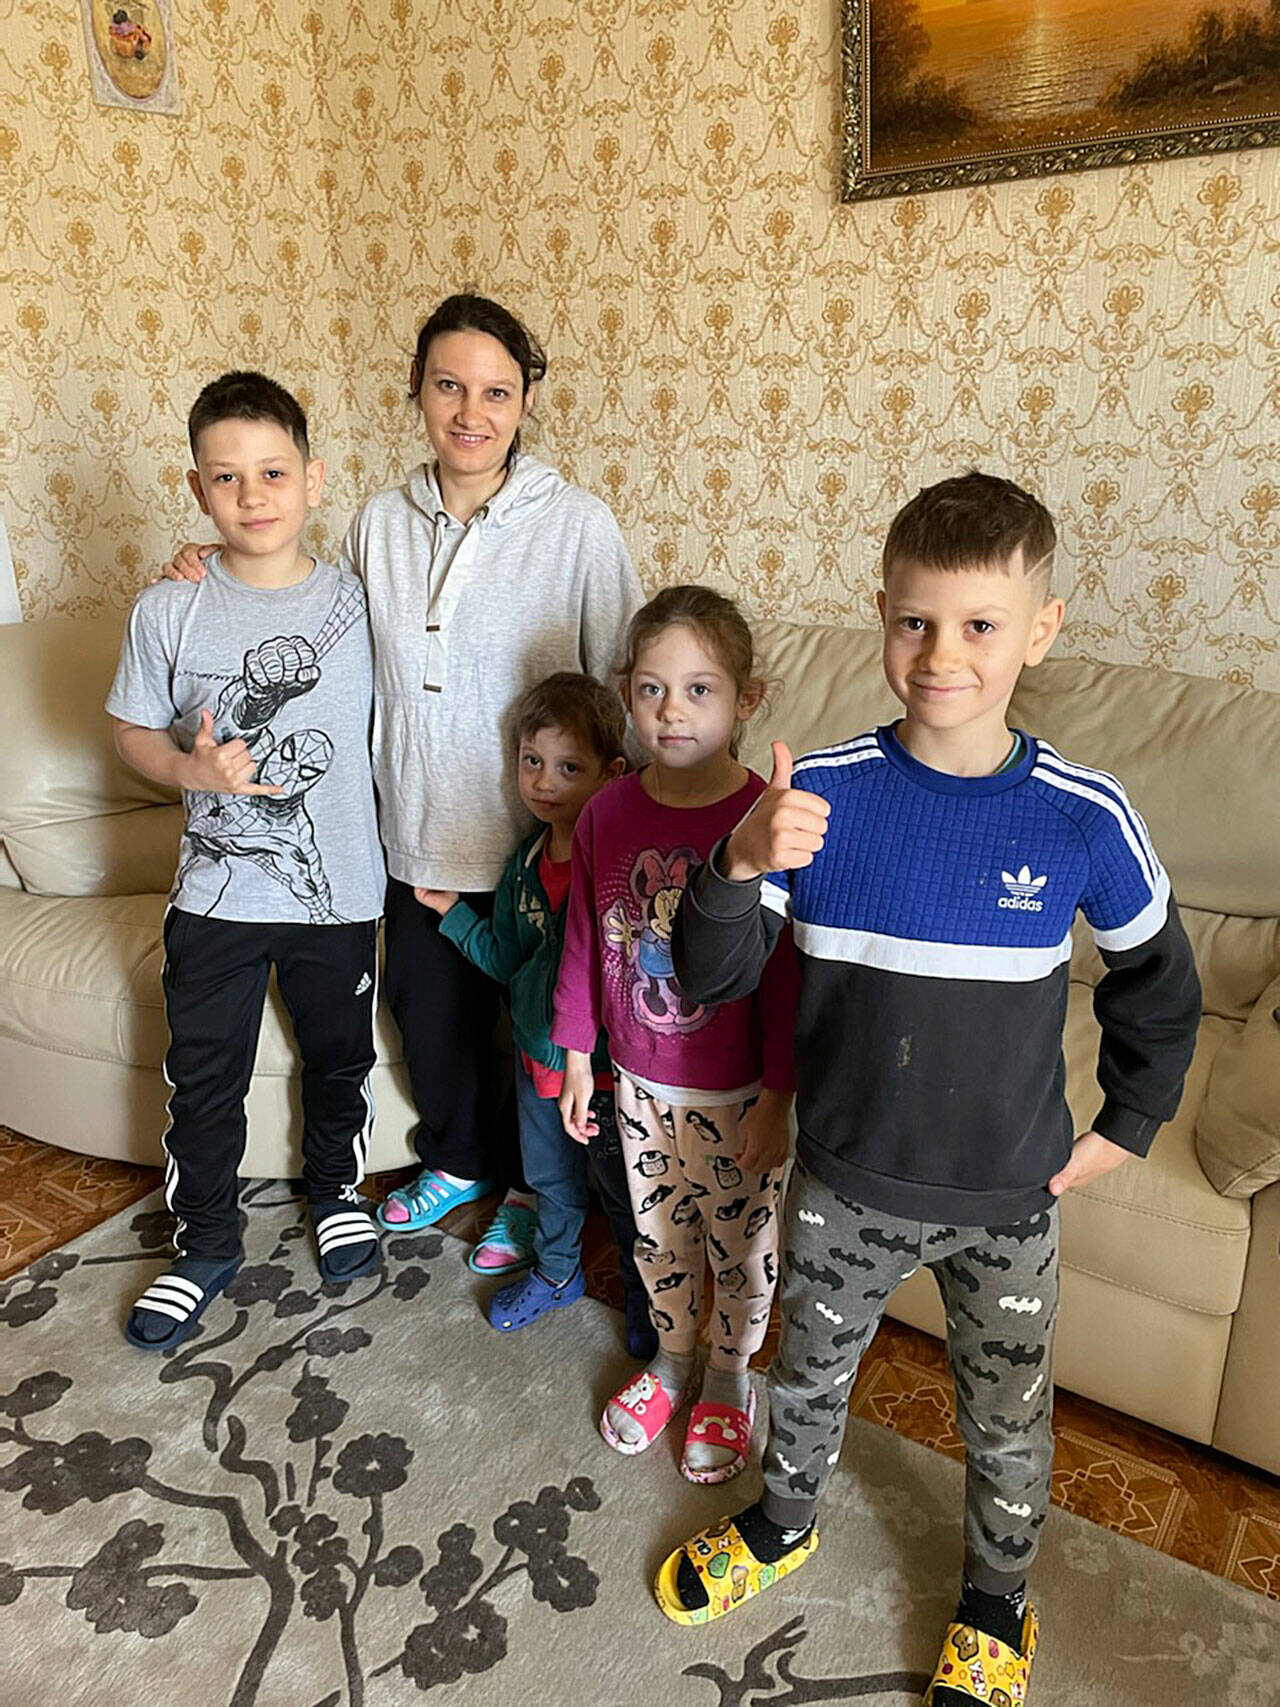 An internally displaced Ukrainian mother and her four children live in temporary housing. (Courtesy photo)